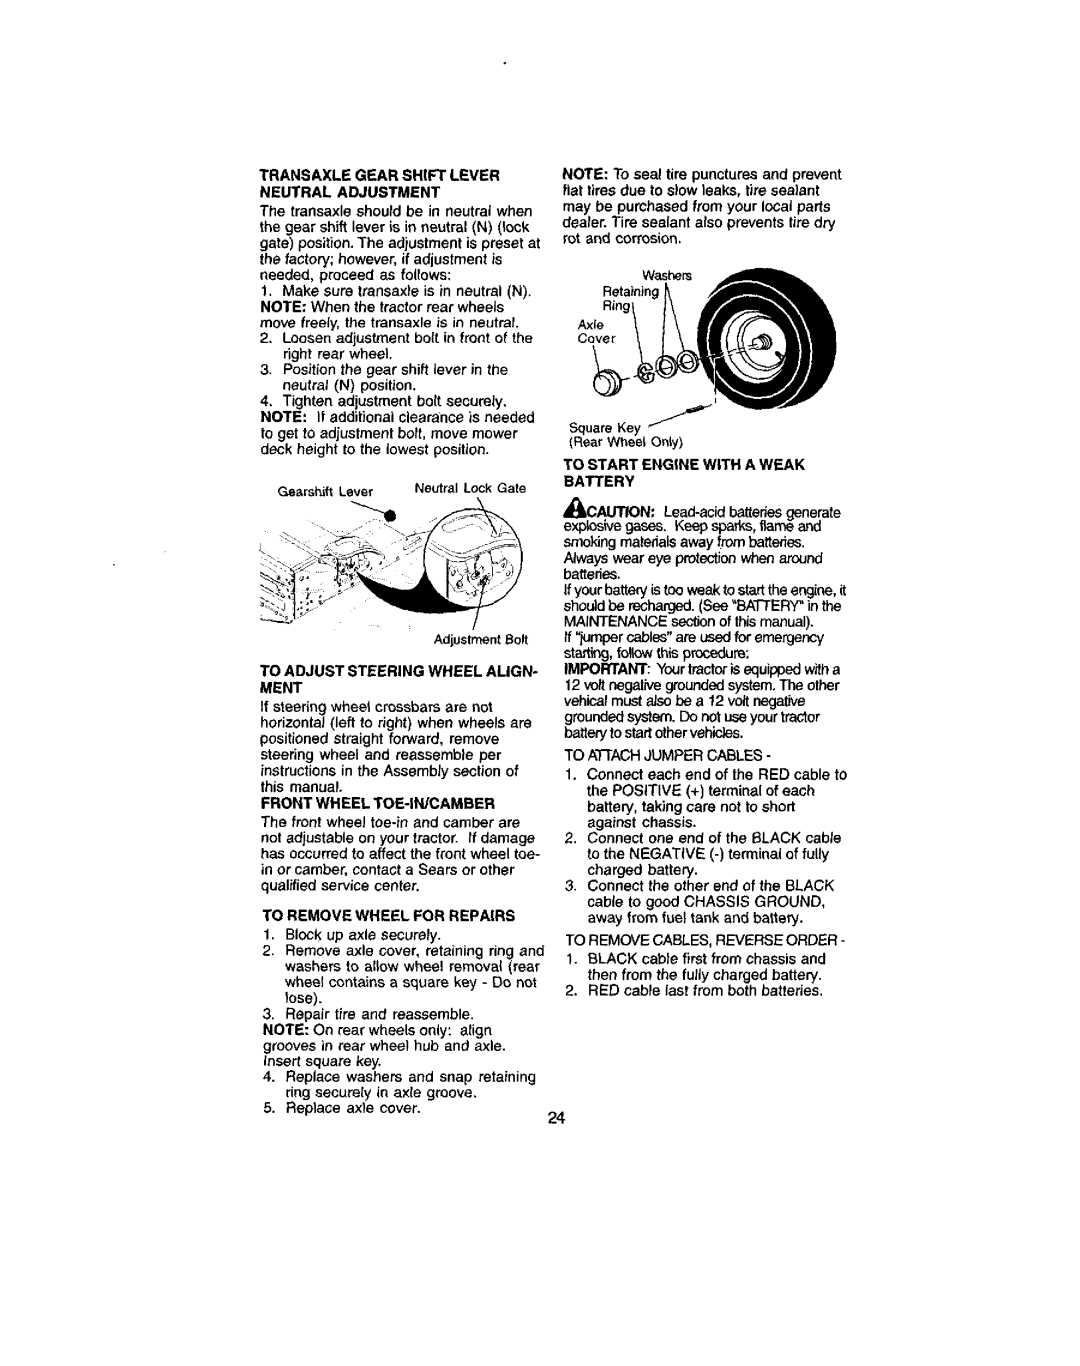 Craftsman 917.272051 owner manual To Start Engine with a Weak Battery, Transaxle Gear Shift Lever Neutral Adjustment 